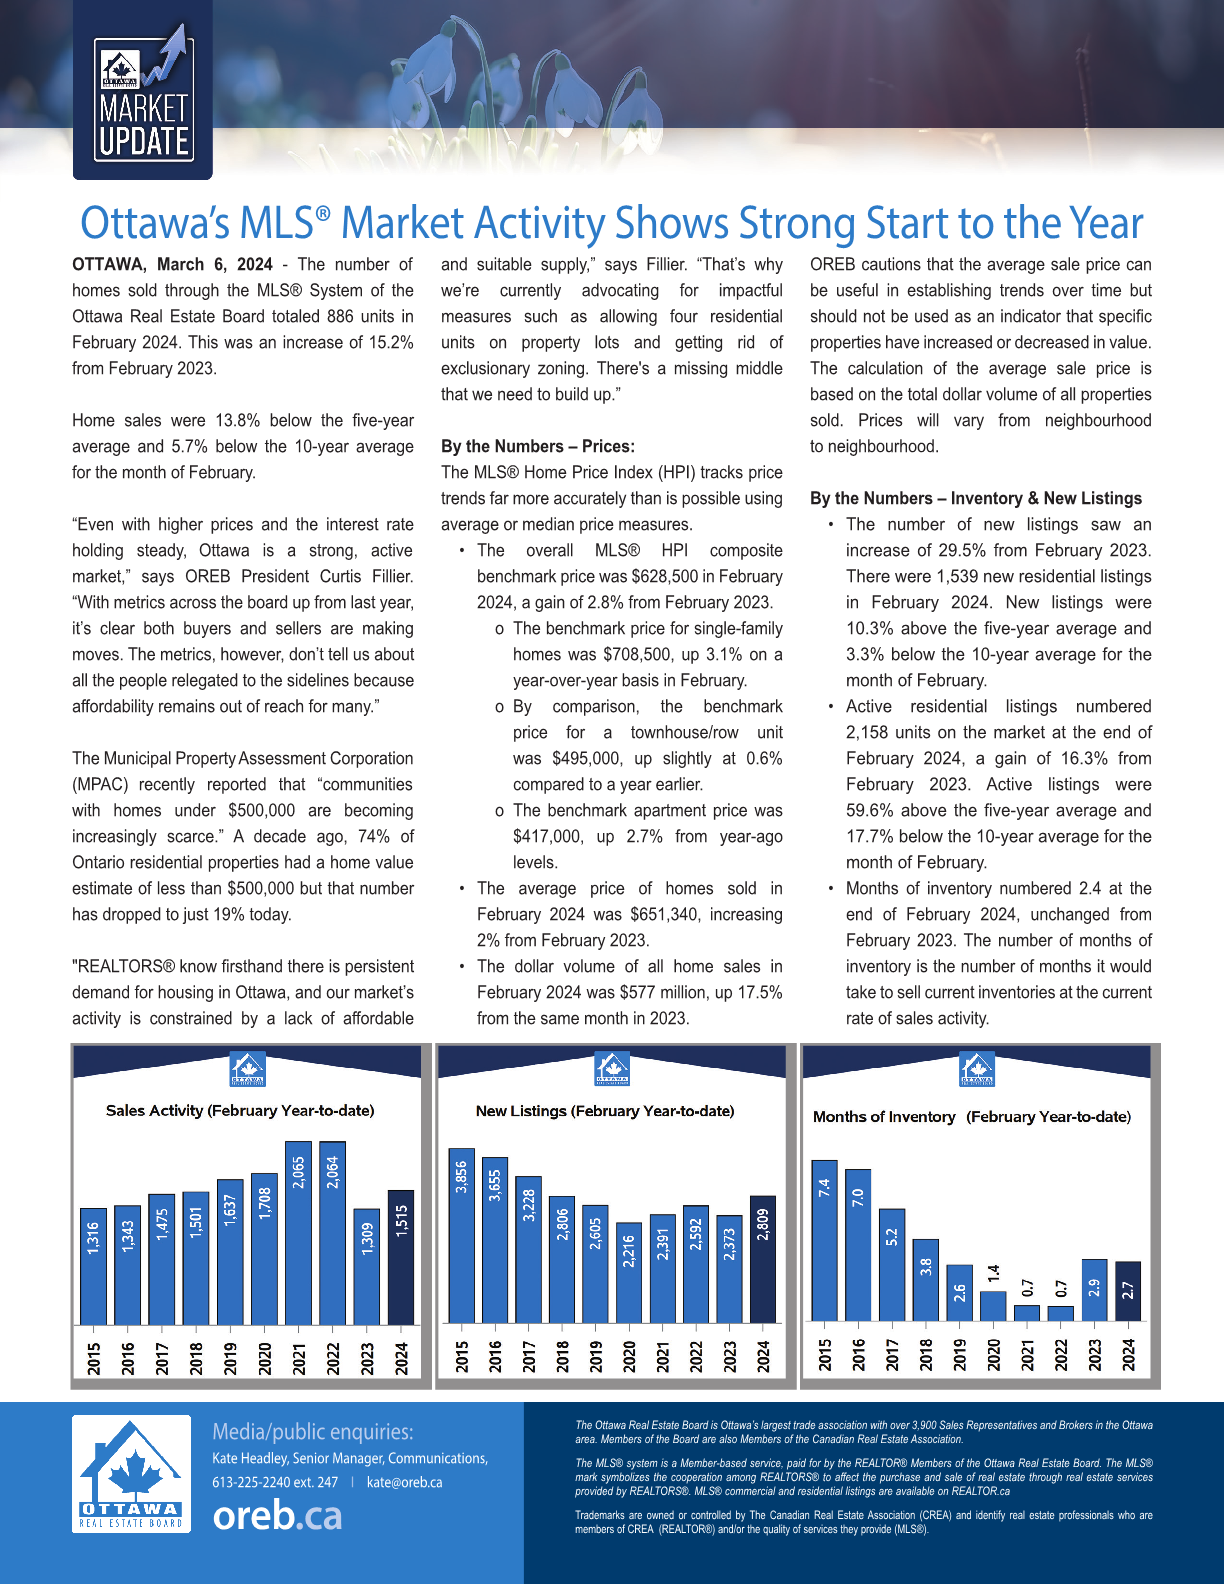 Ottawa Market Trend is Showing Strong Start to the Year